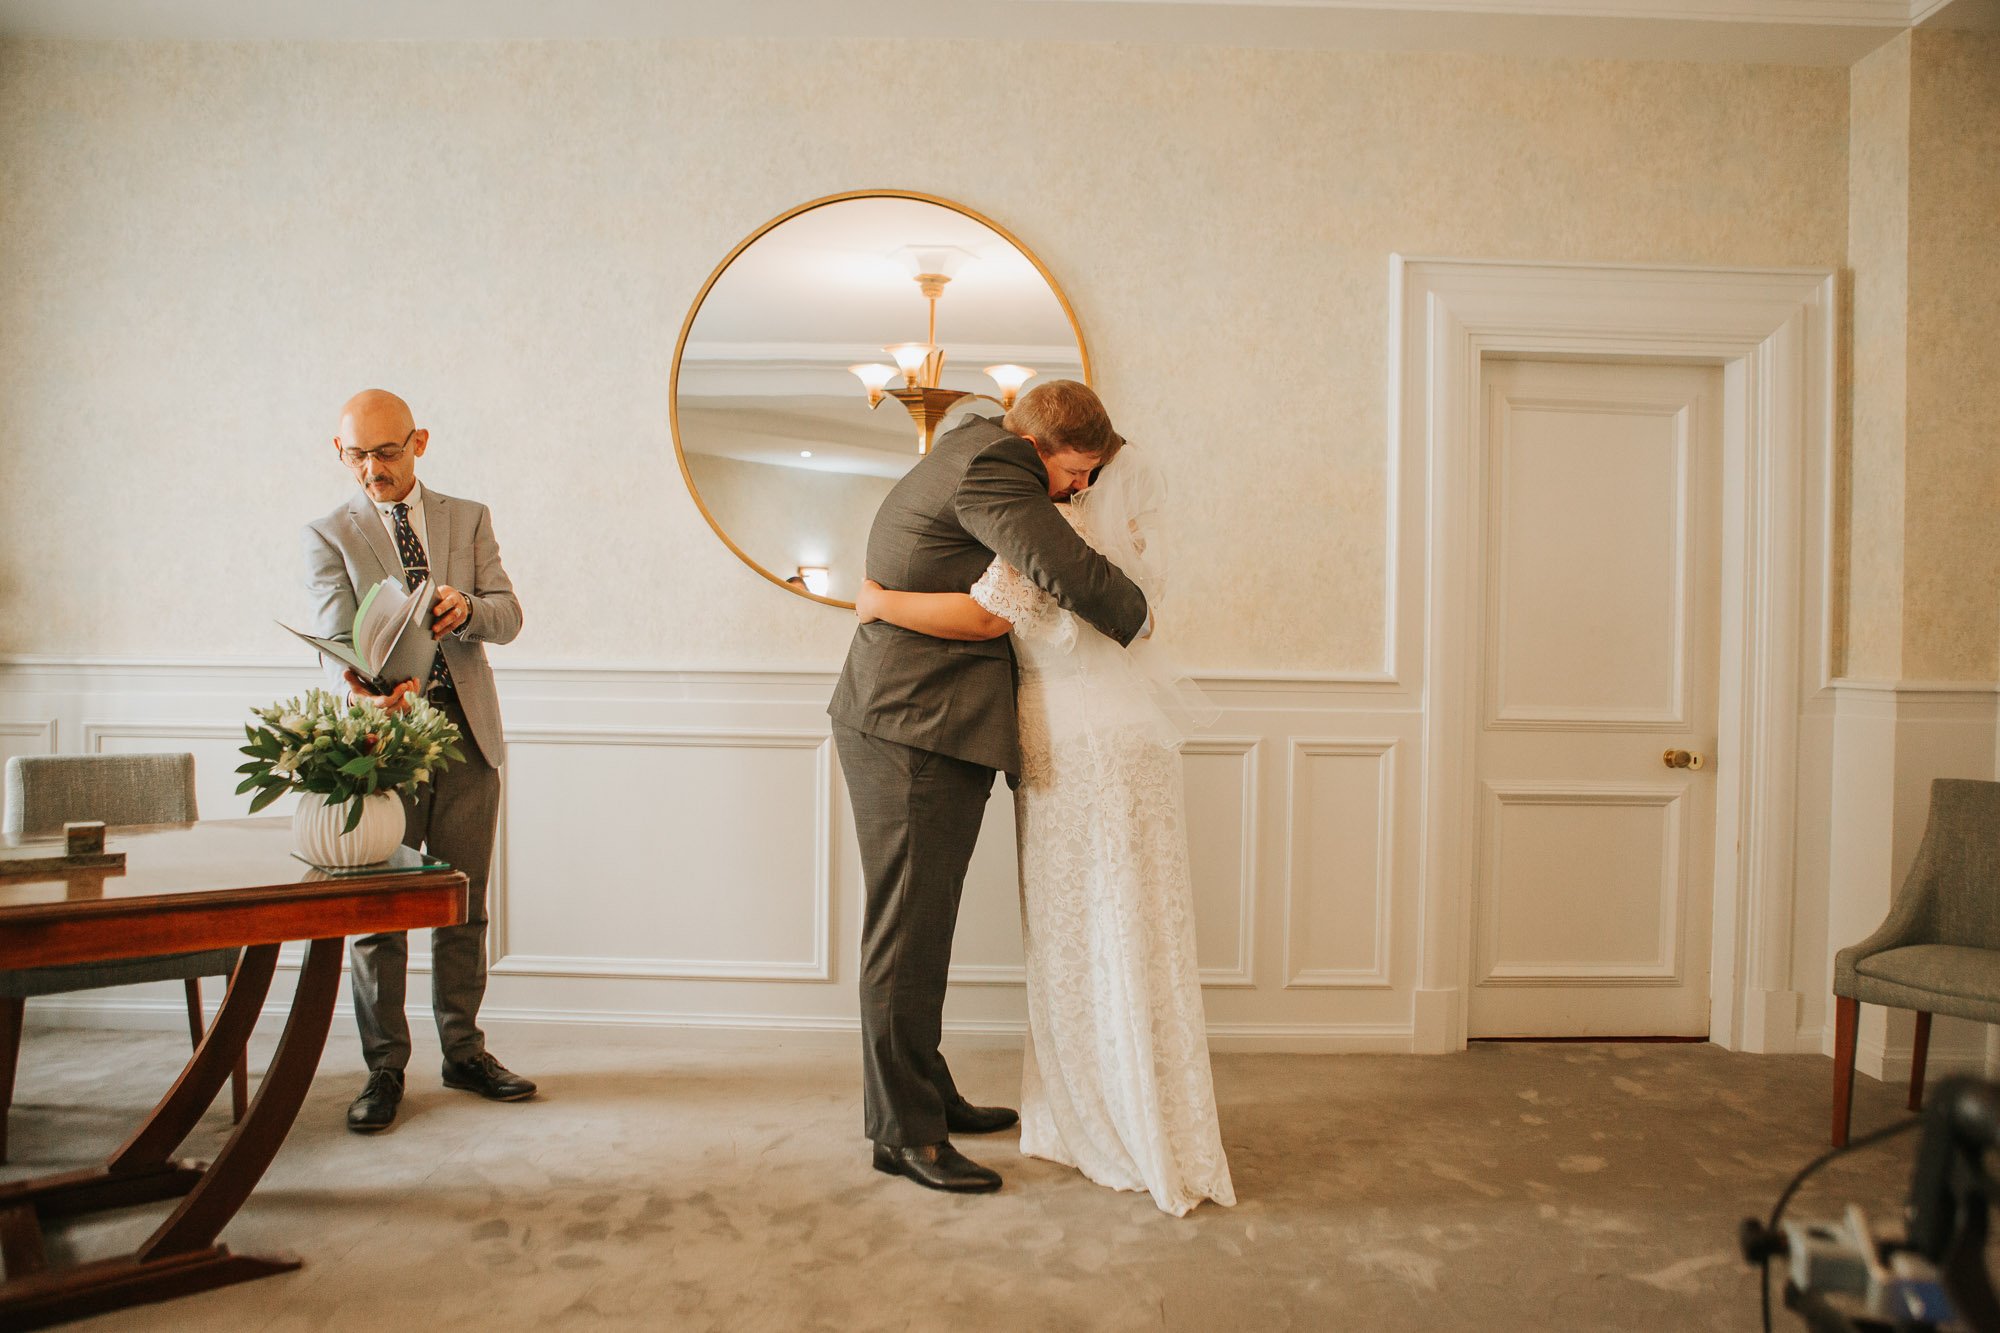  Bride and Groom embrace after marrying at Wandsworth town hall in Wandsworth, South London. 